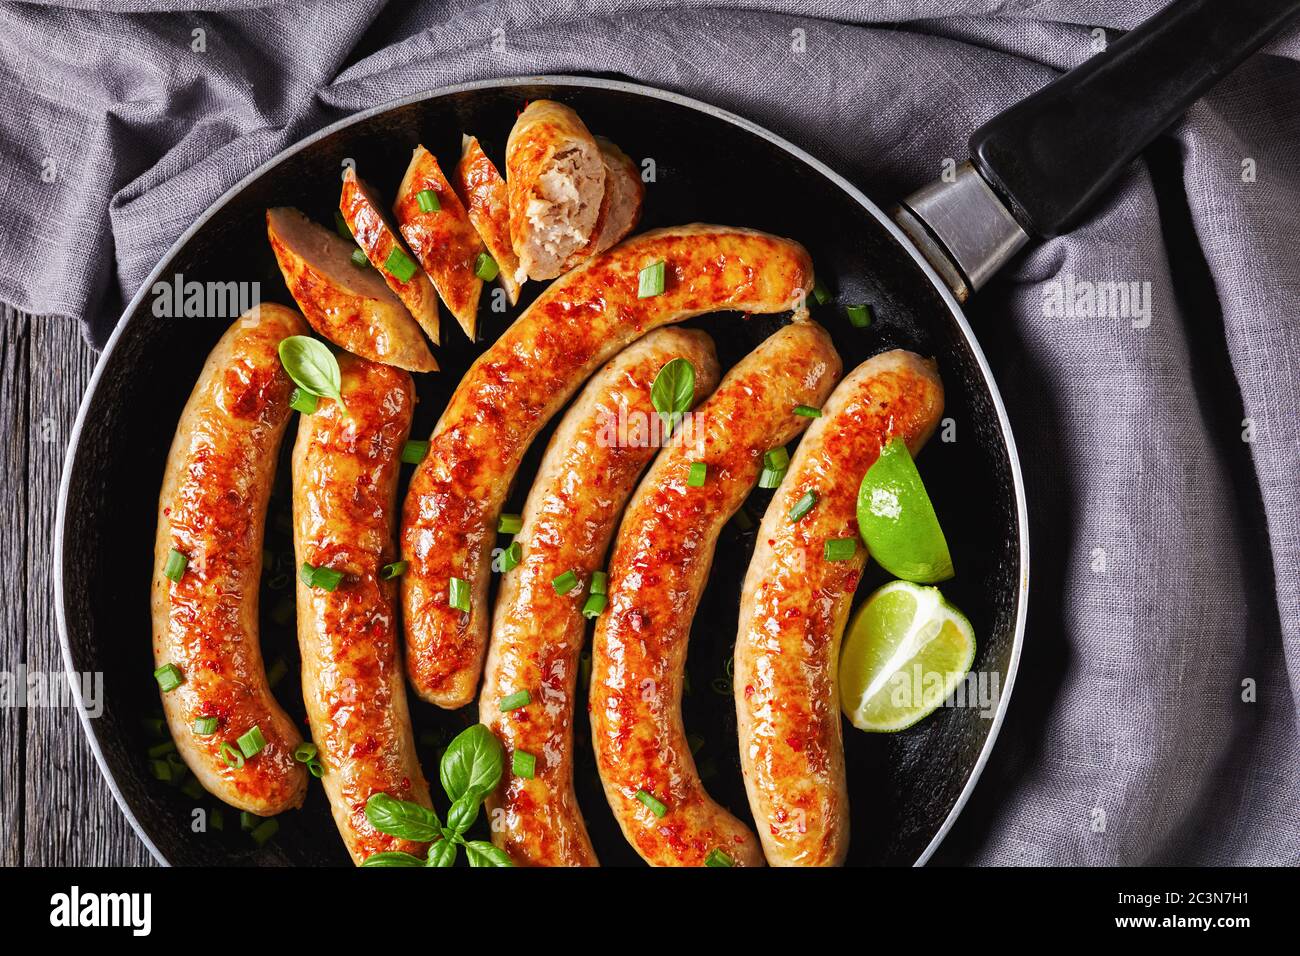 Breakfast pork sausage links or patties fried on a skillet with fresh basil and spring onion served on a dark wooden background with cutlery, lime wed Stock Photo